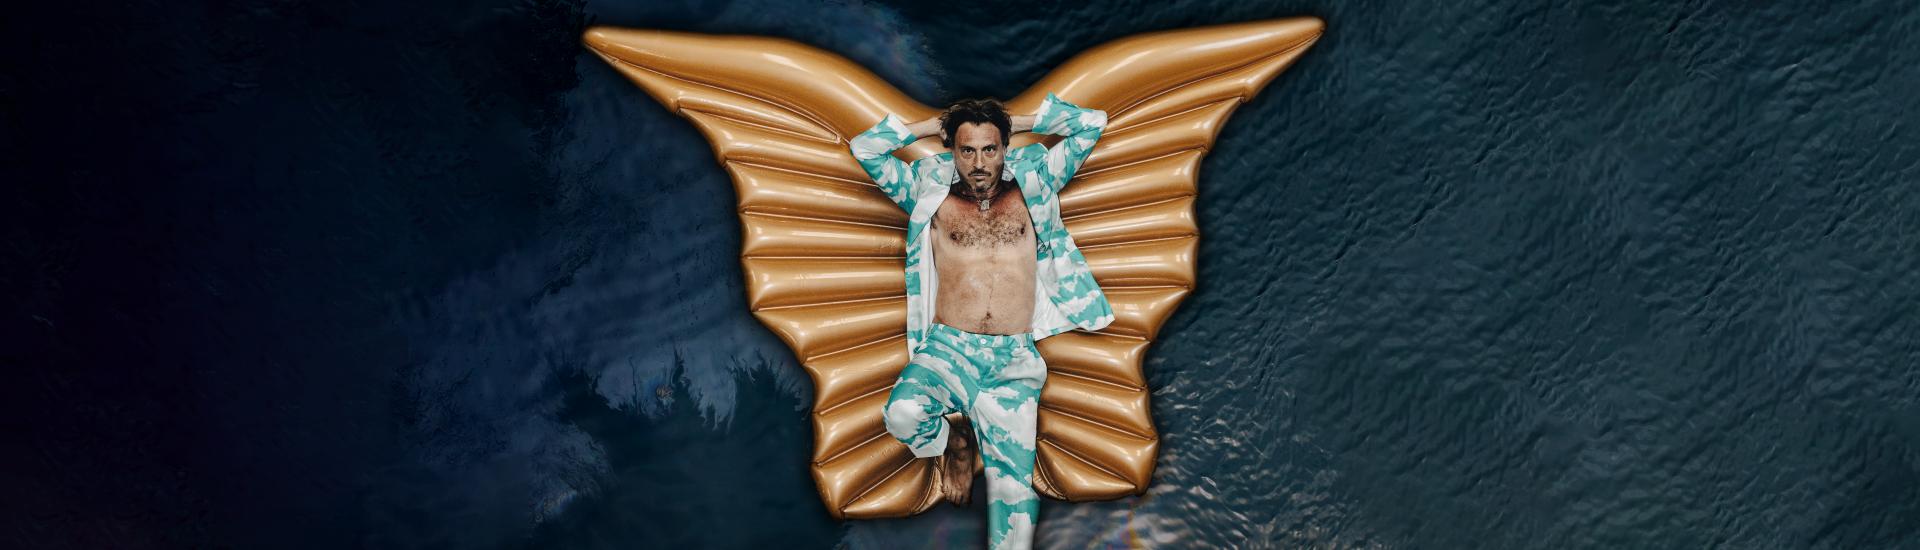 Barechested man wearing a cloud-patterned suit lying on inflatable wings floating on water